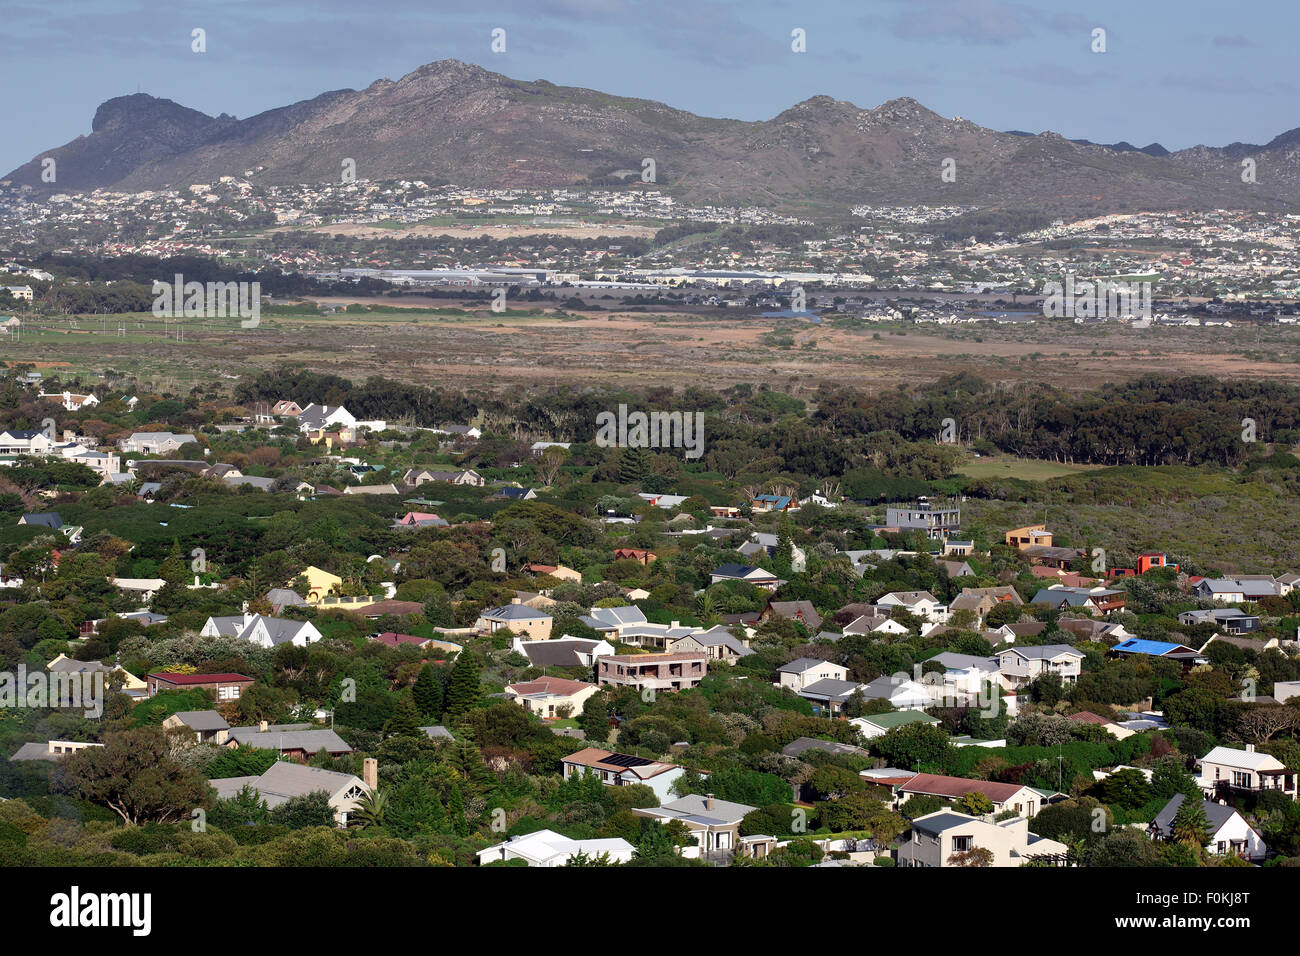 Elevated scenic view of Noordhoek, Cape Town, South Africa Stock Photo